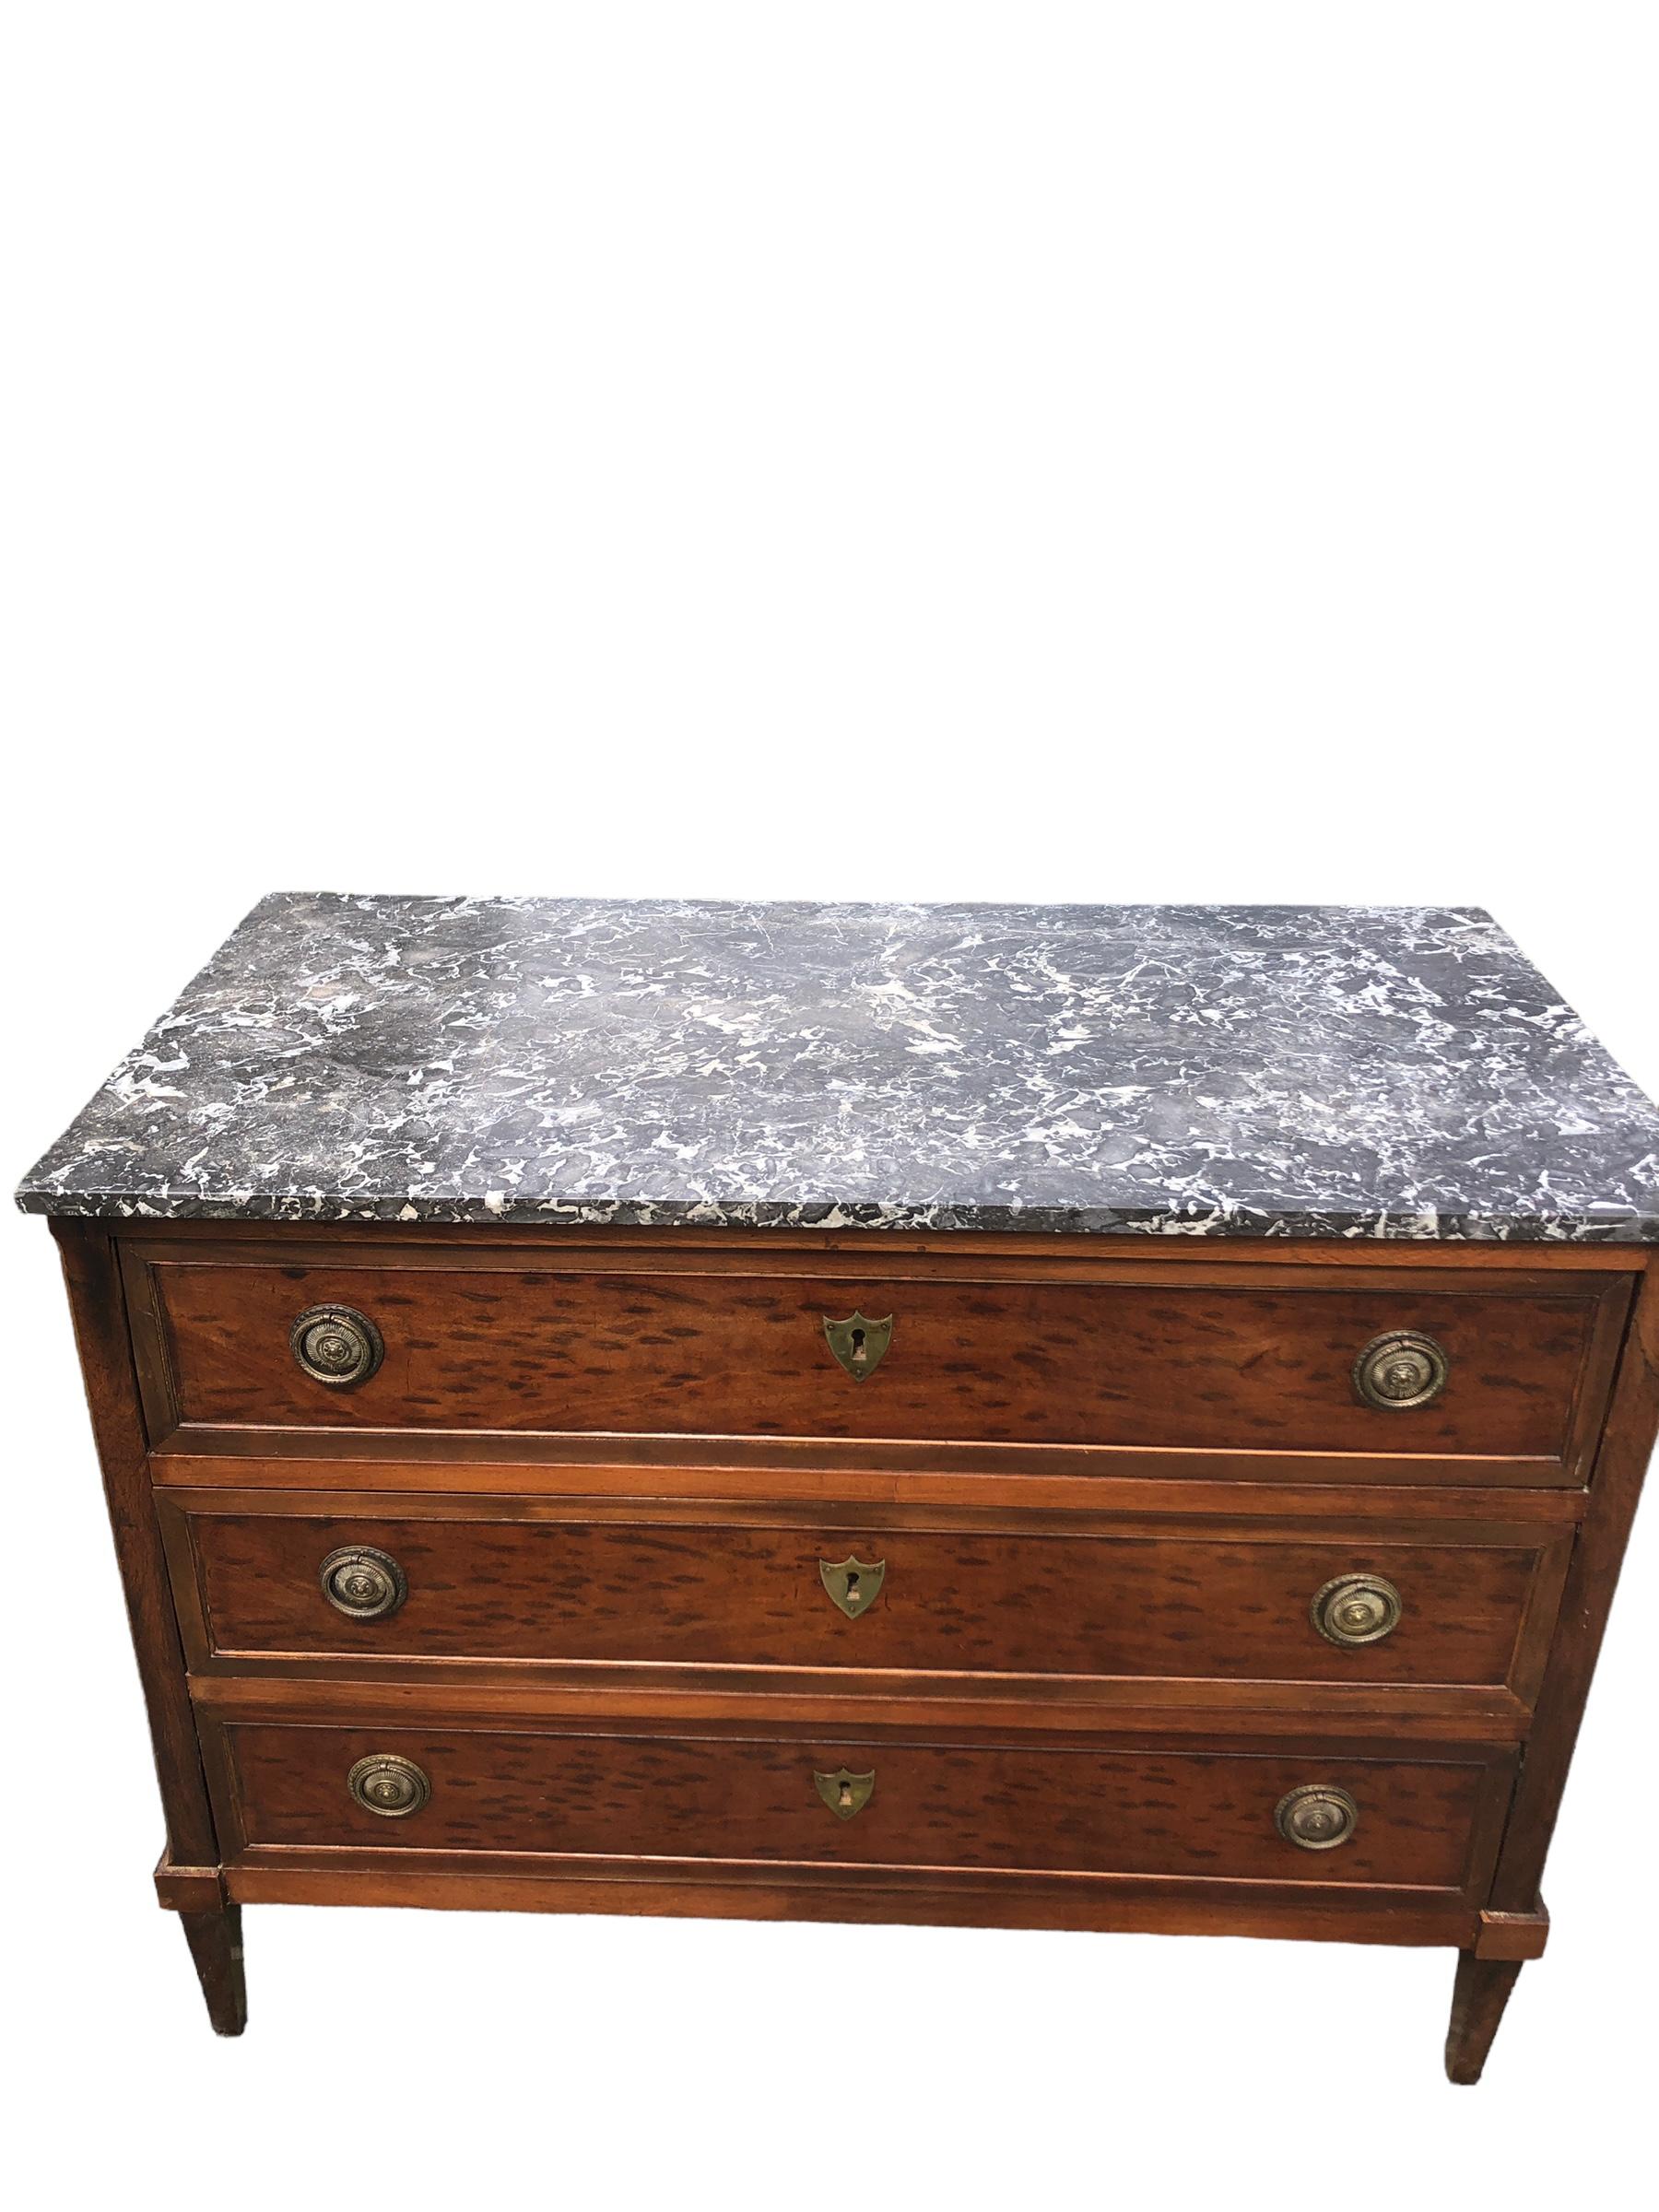 French 19th Century Louis XVI Style Marble Top Plum Pudding Mahogany Chest For Sale